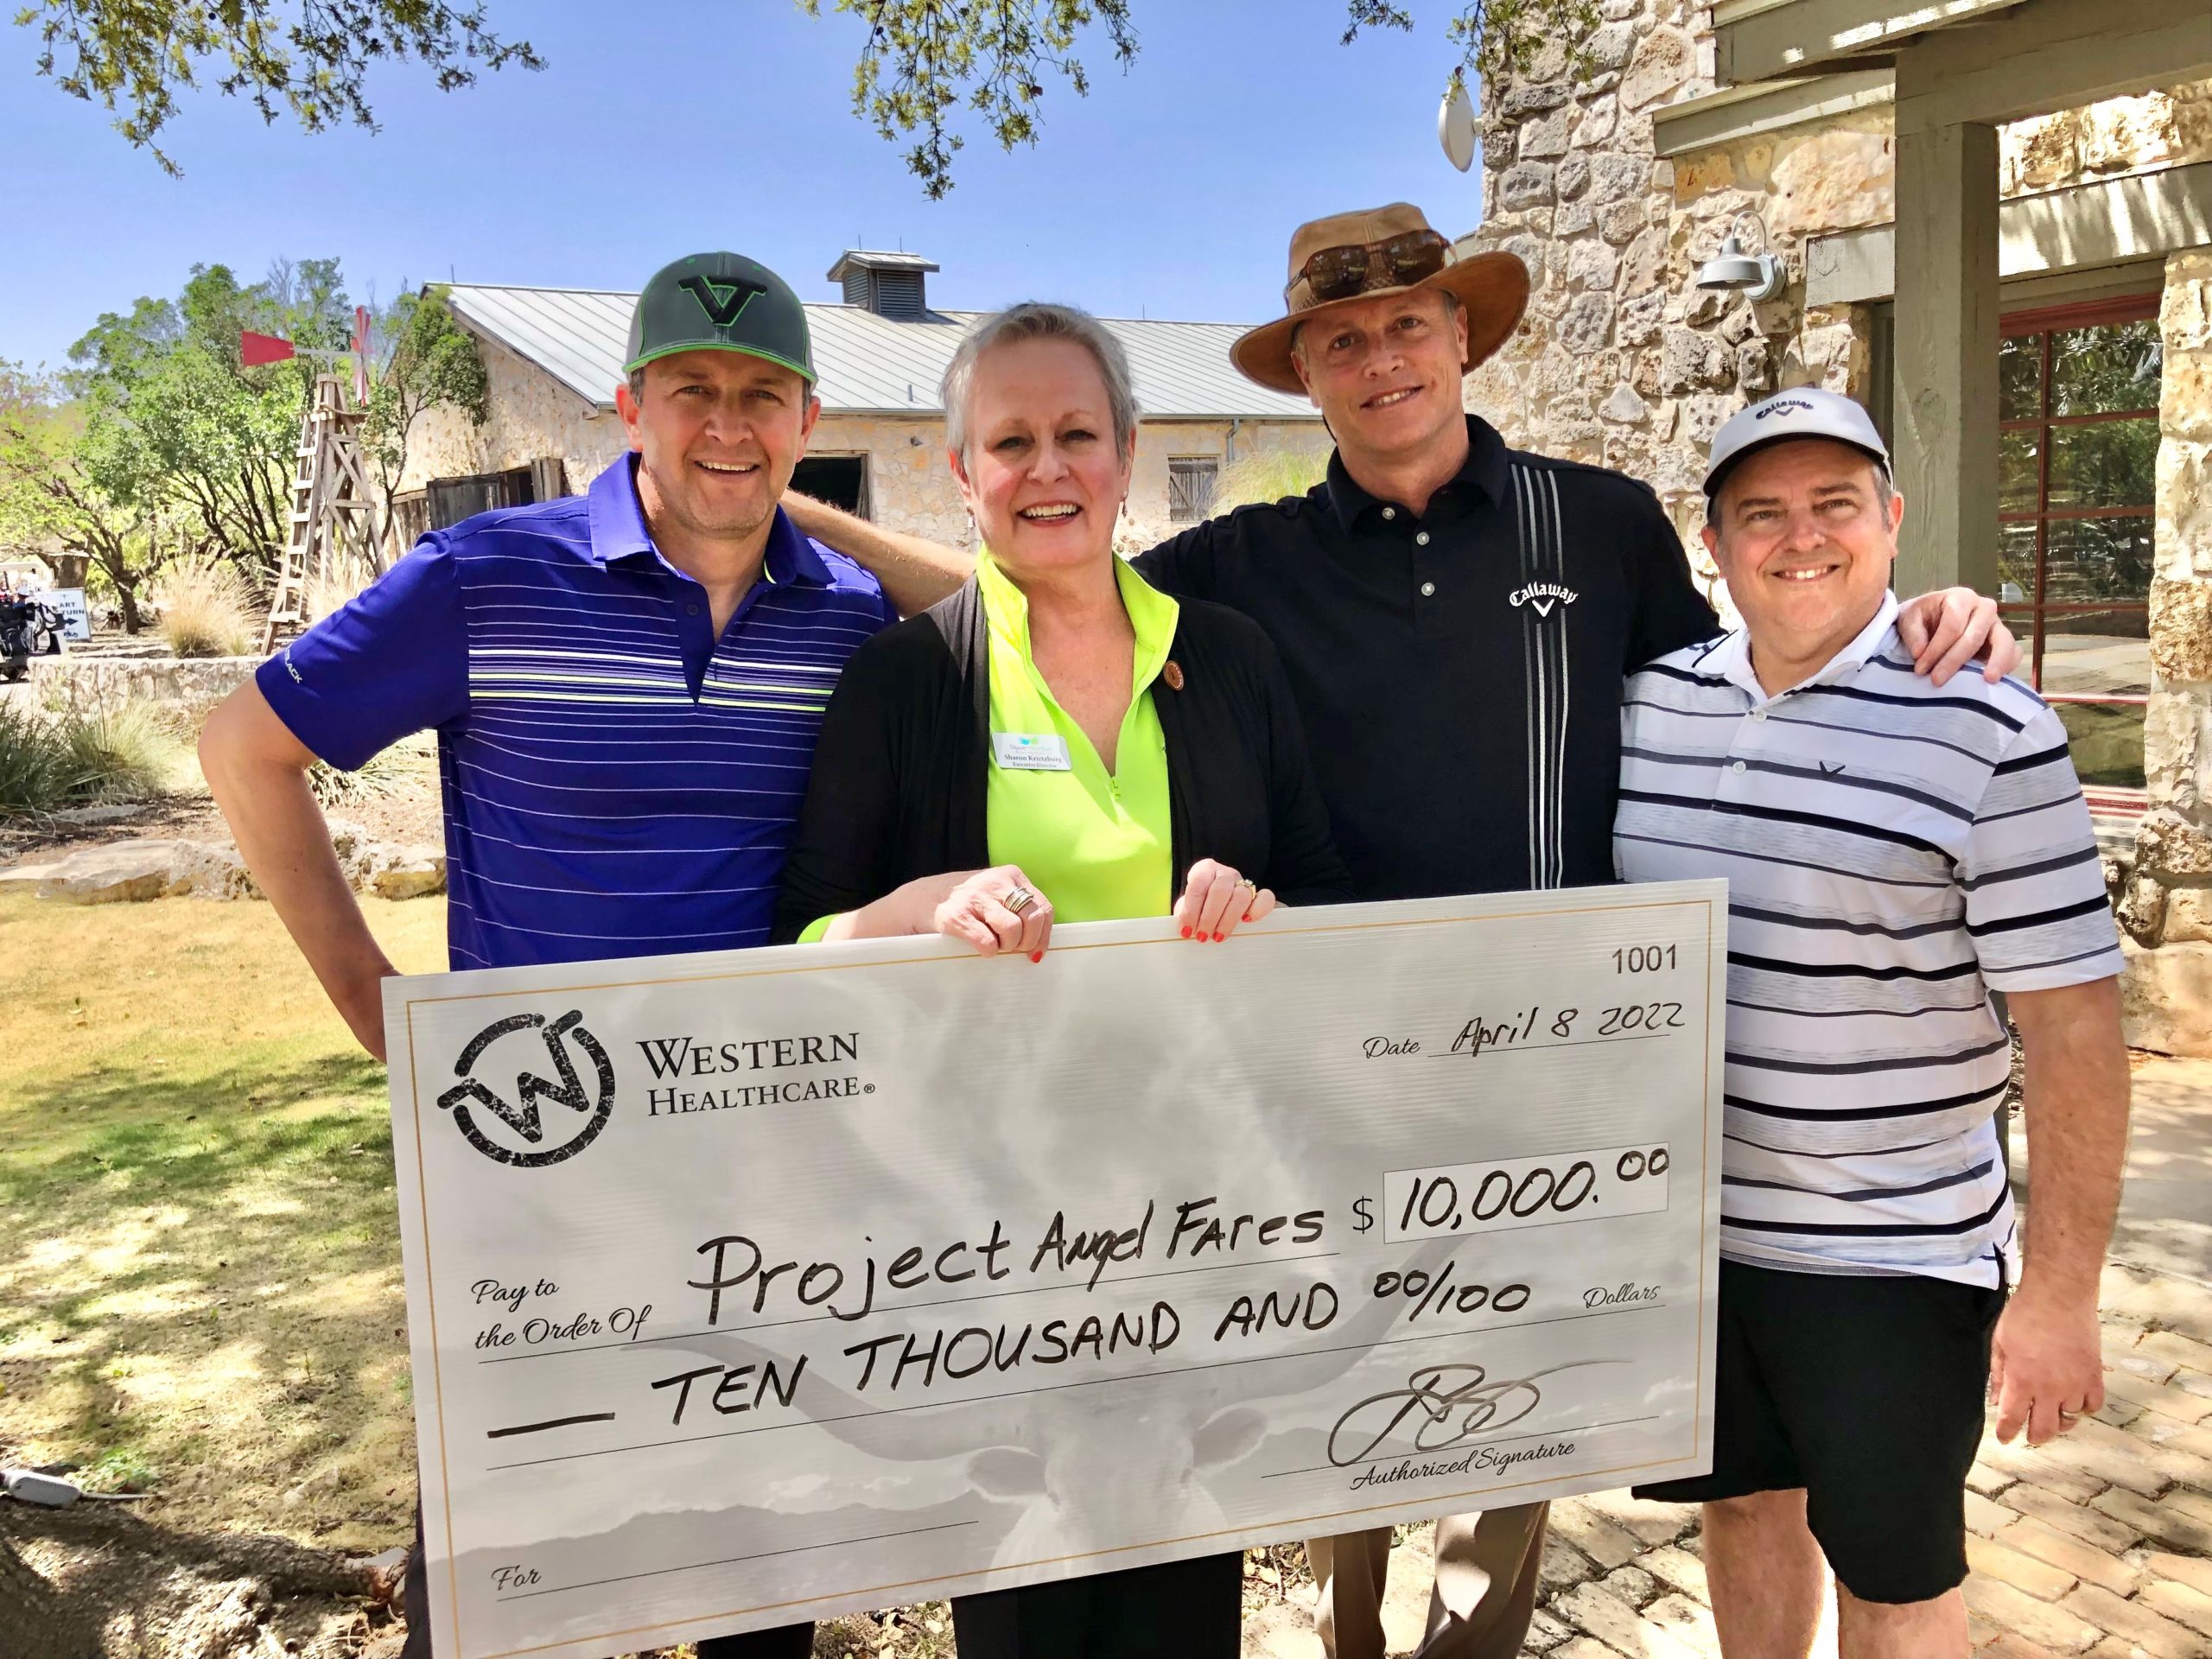 Western Healthcare Sponsors Golf Tournament to Raise Money For Children With Disabilities